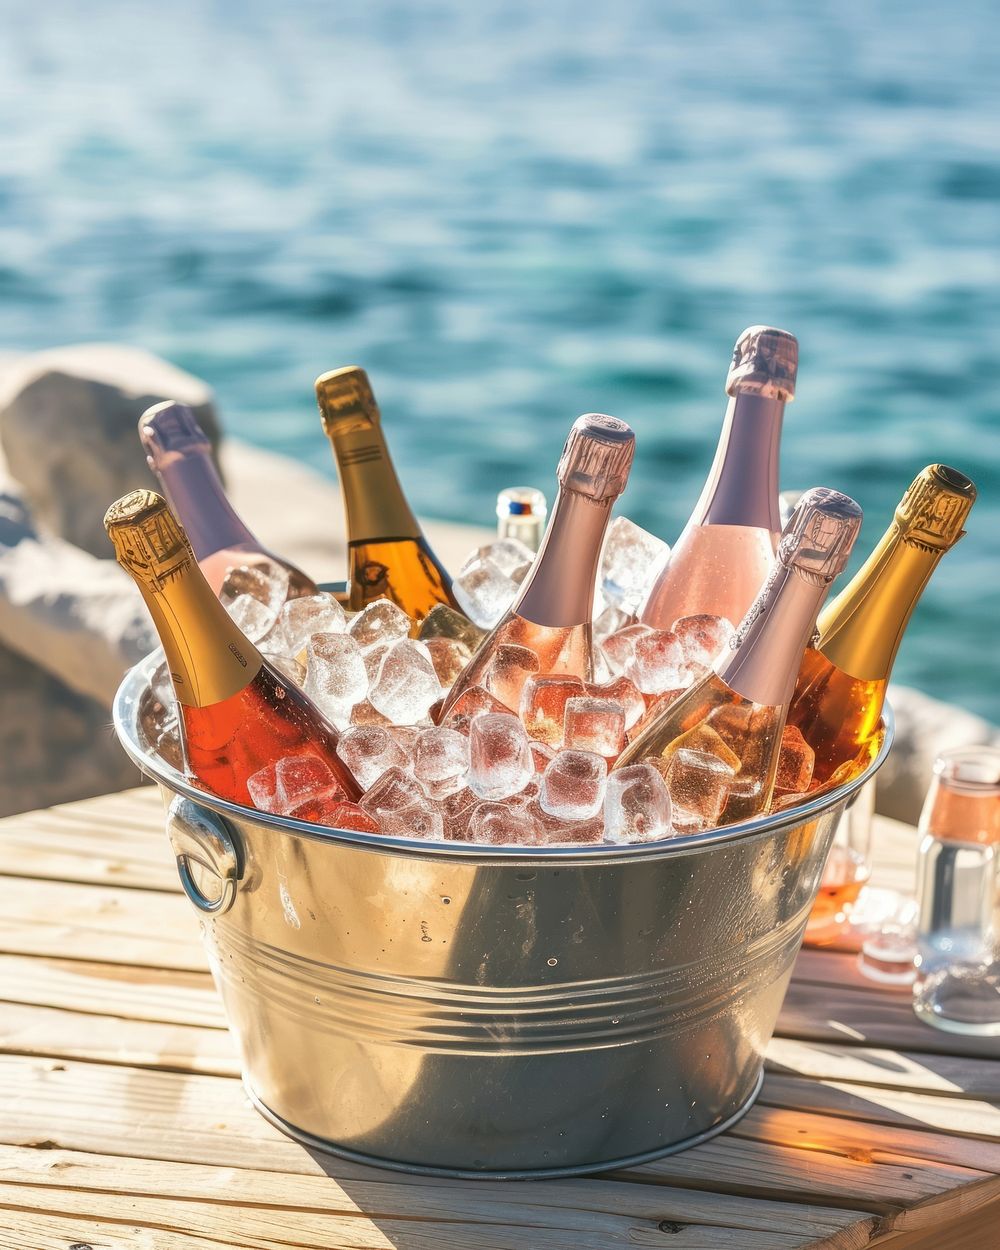 Assorted sparking wine bottles in a metal bucket full of ice put on wood table against beach view outdoors summer drink.